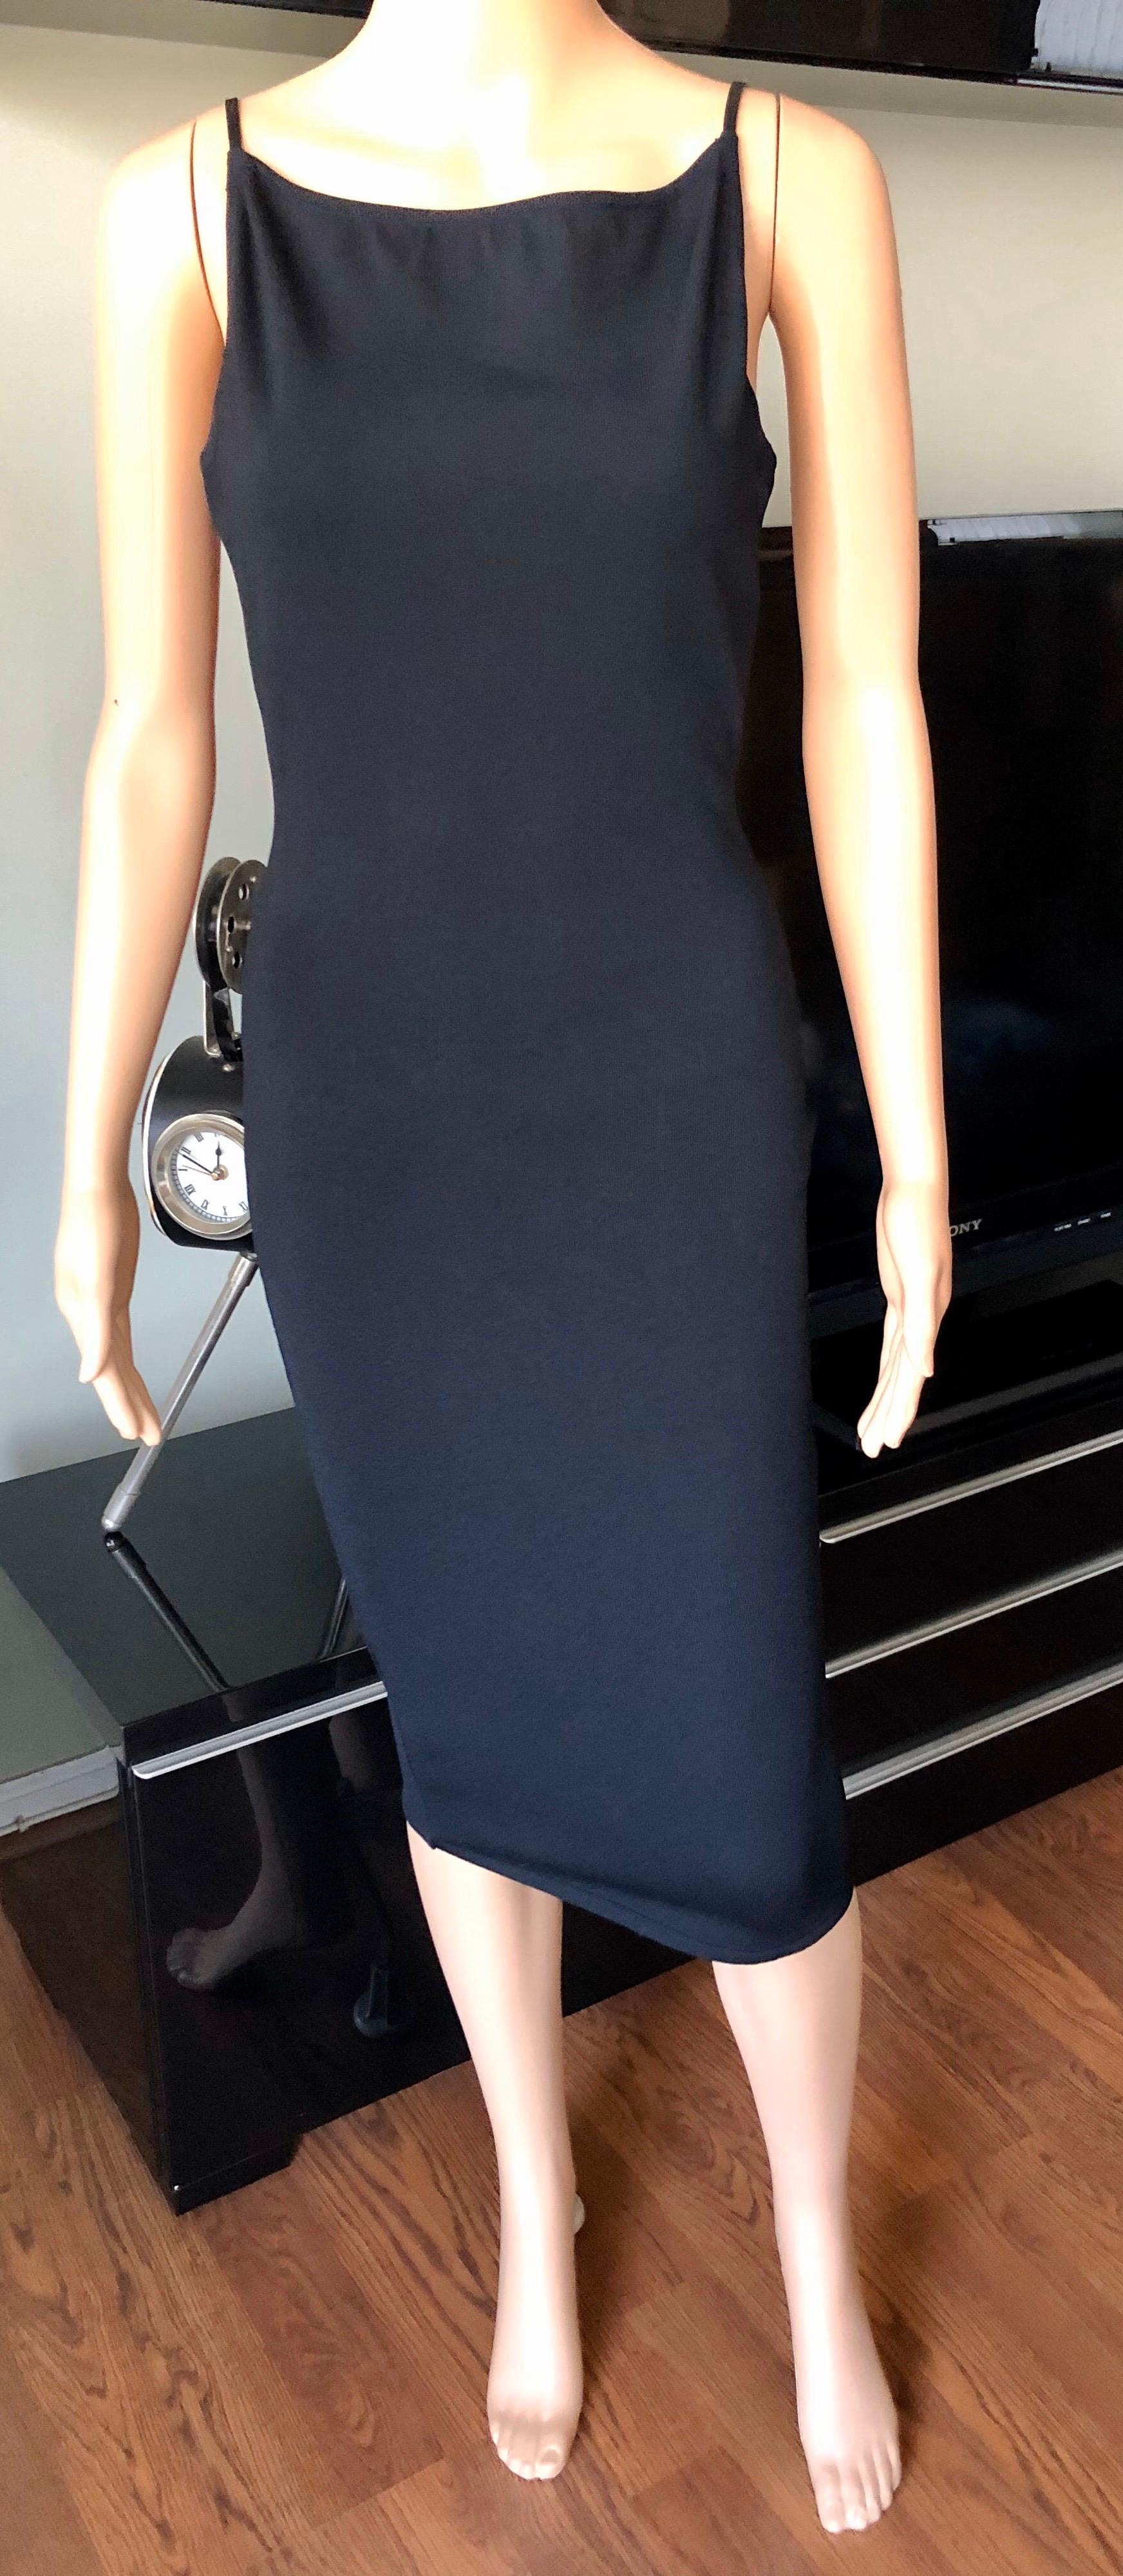 Tom Ford for Gucci S/S 1998 Bodycon Backless Buckle Straps Knit Black Midi Dress In Excellent Condition For Sale In Naples, FL